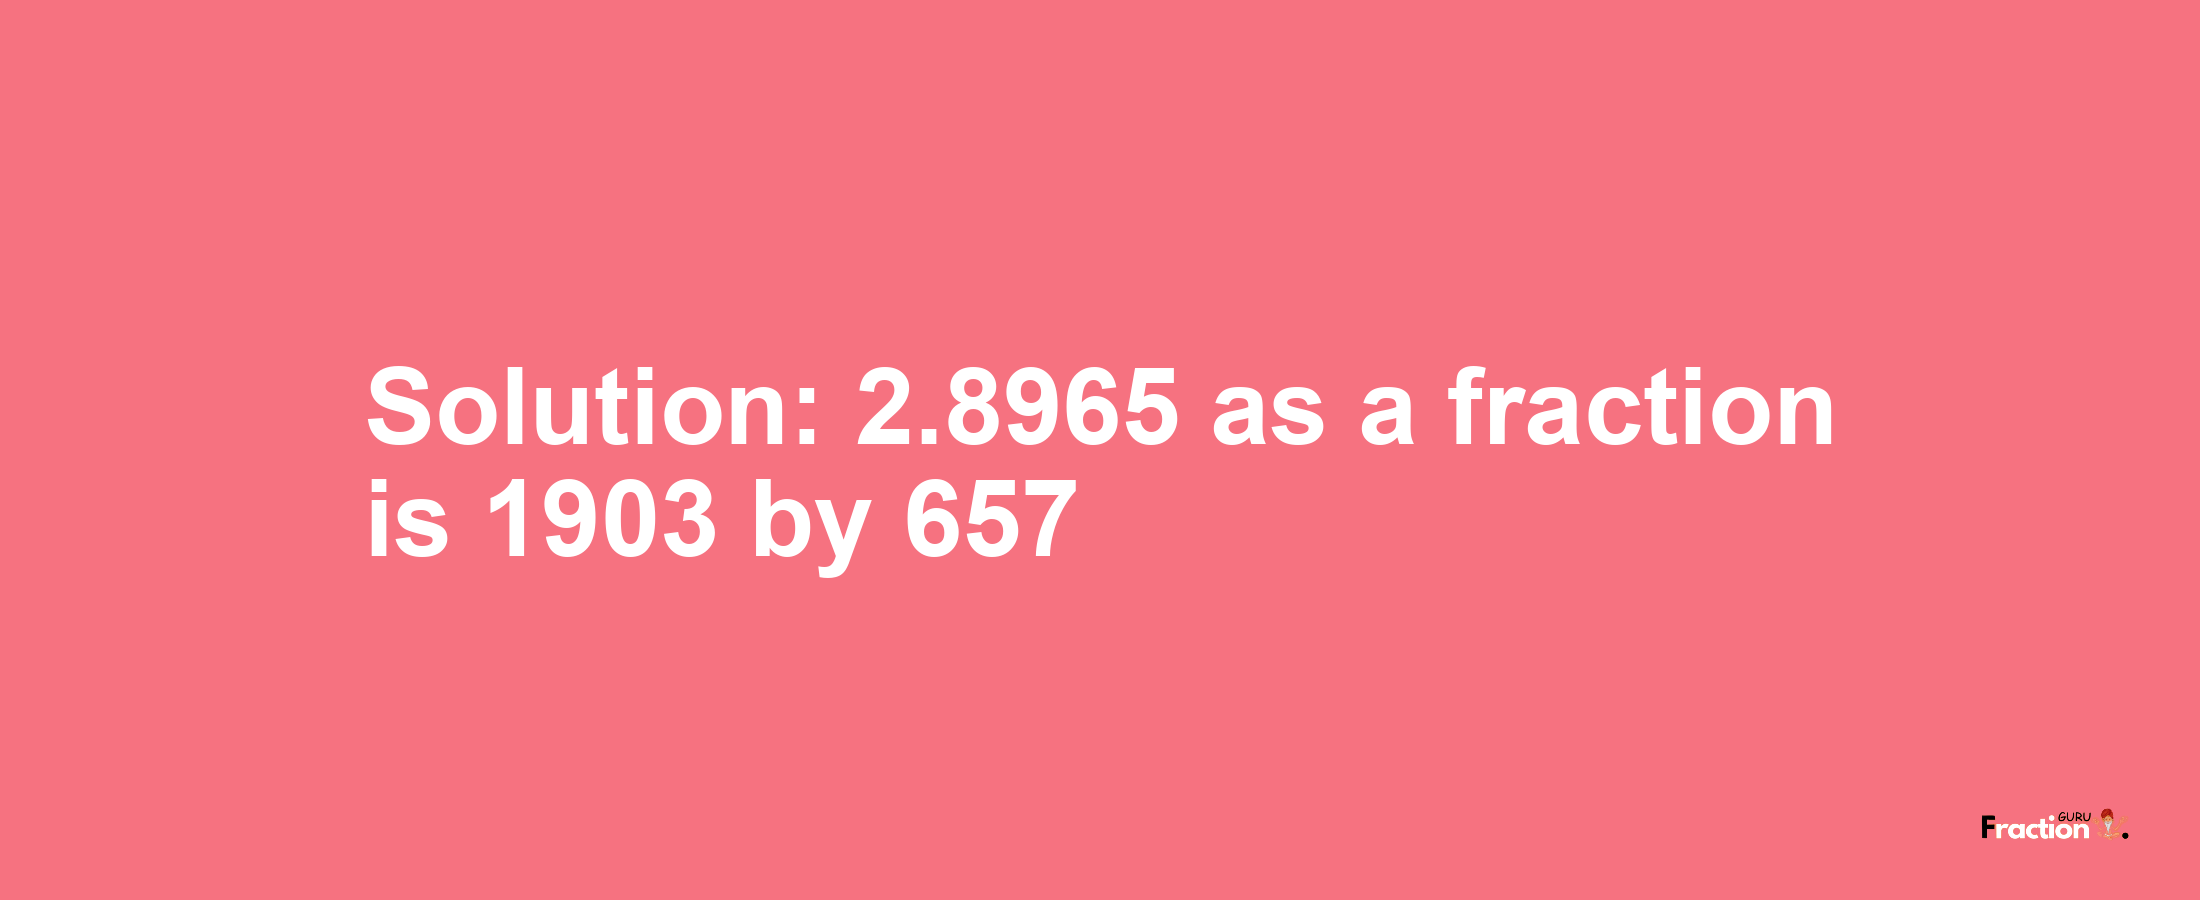 Solution:2.8965 as a fraction is 1903/657